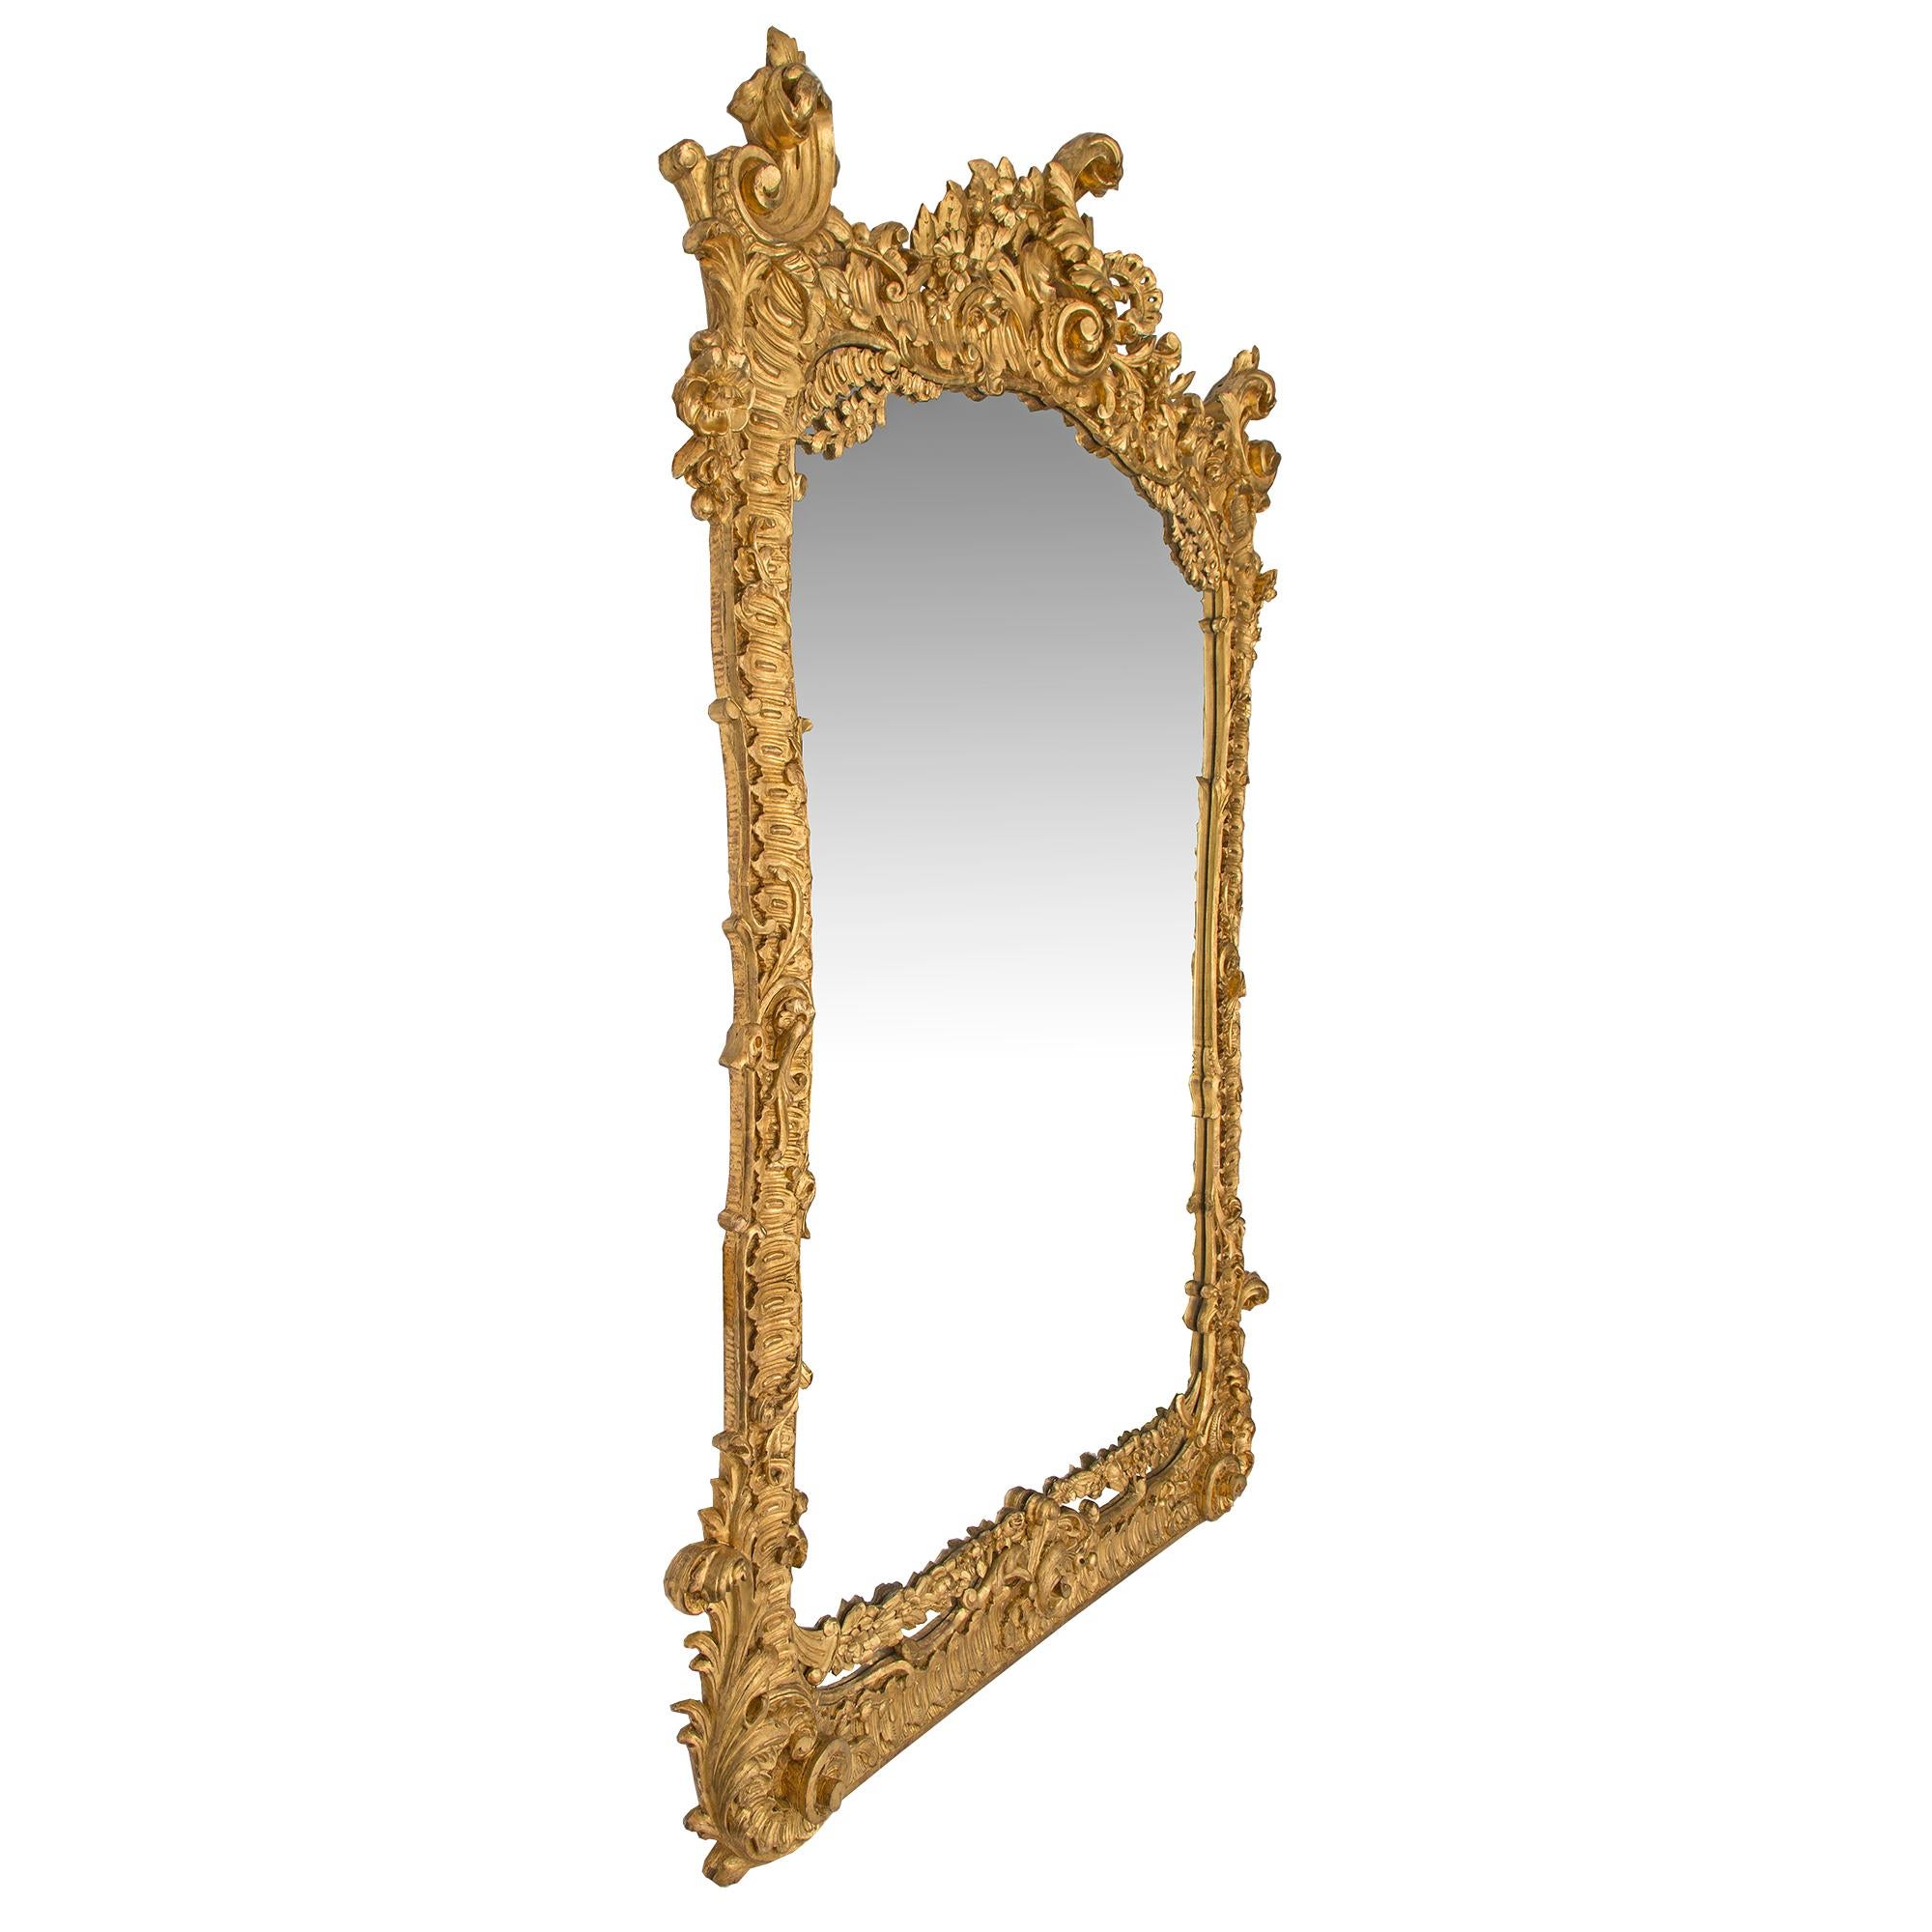 An exceptional Italian mid 19th century Rococo St. giltwood mirror. The original mirror plate is framed within an impressive and richly detailed giltwood border. Above the straight base and leading up the curvaceous sides are intricately carved